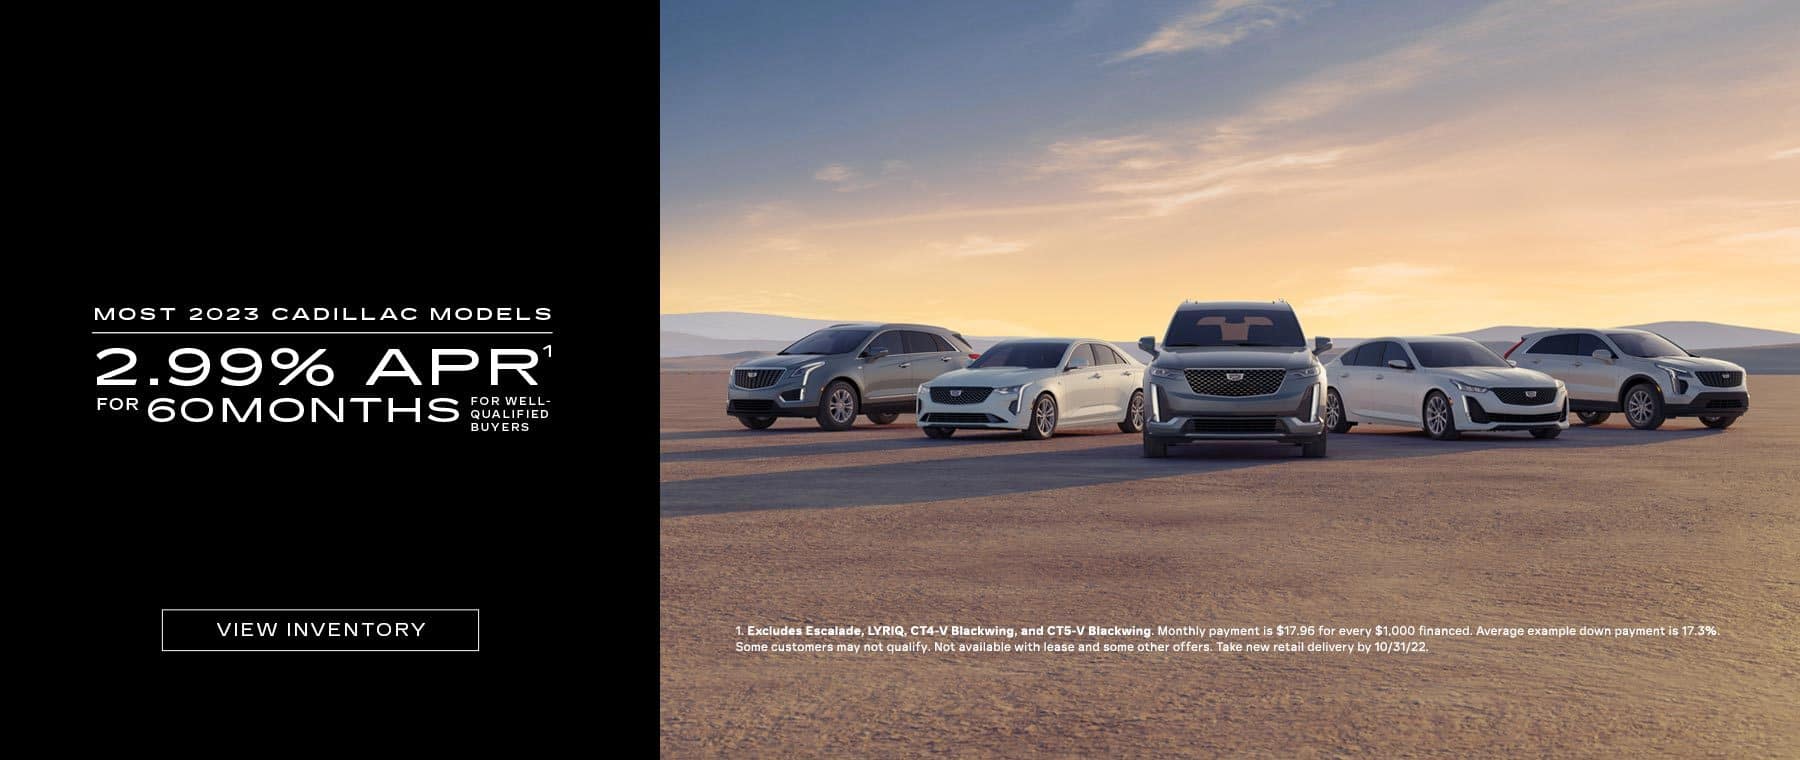 MOST 2023 CADILLAC MODELS. 2.99% APR for 60 months for well-qualified buyers.